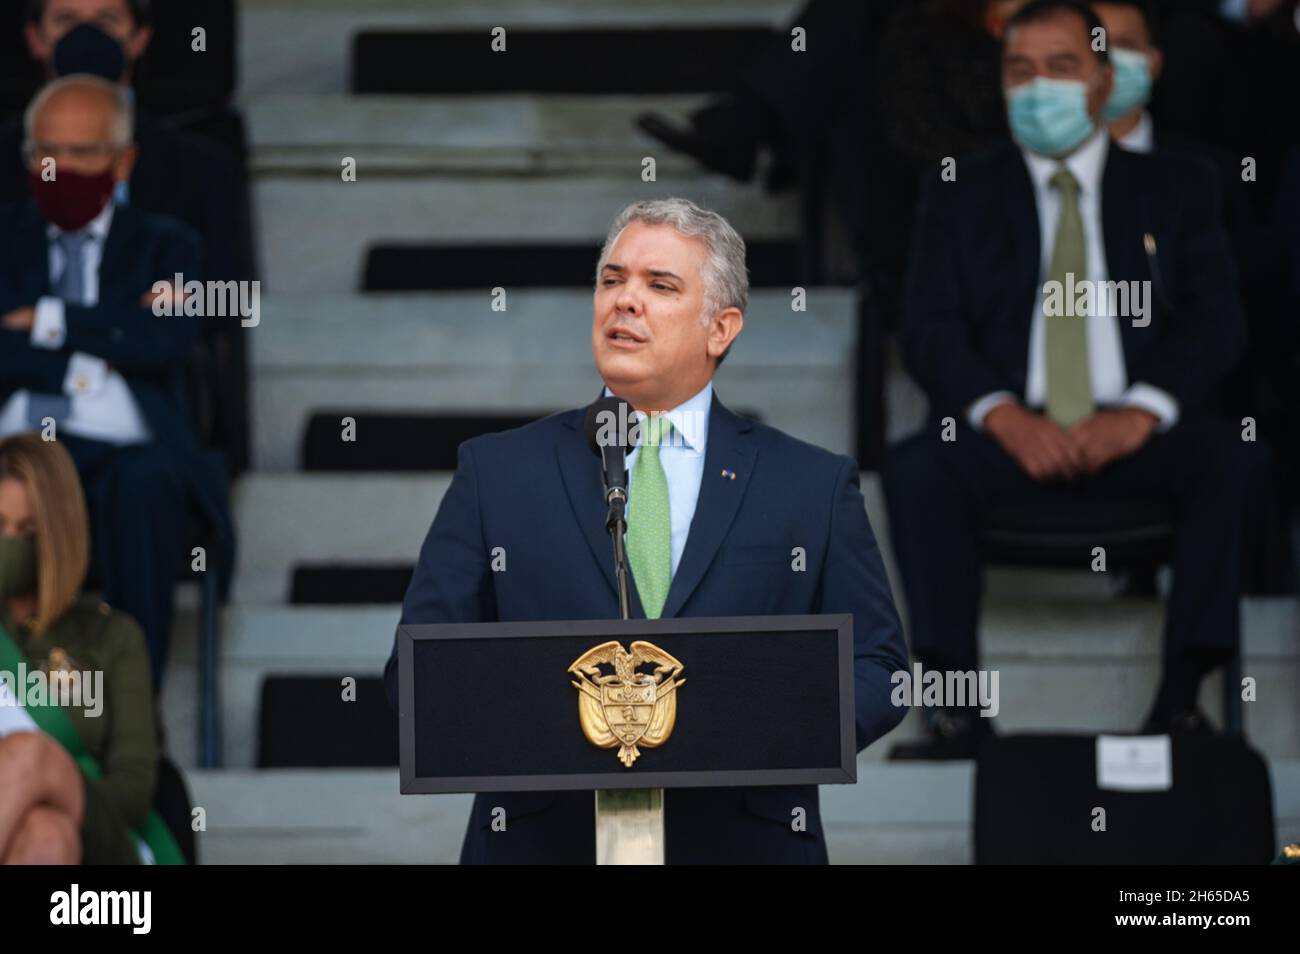 Colombia's president, Ivan Duque Marquez gives a speech during an event were Colombia's president Ivan Duque Marquez and Colombia's Minister of Defens Stock Photo